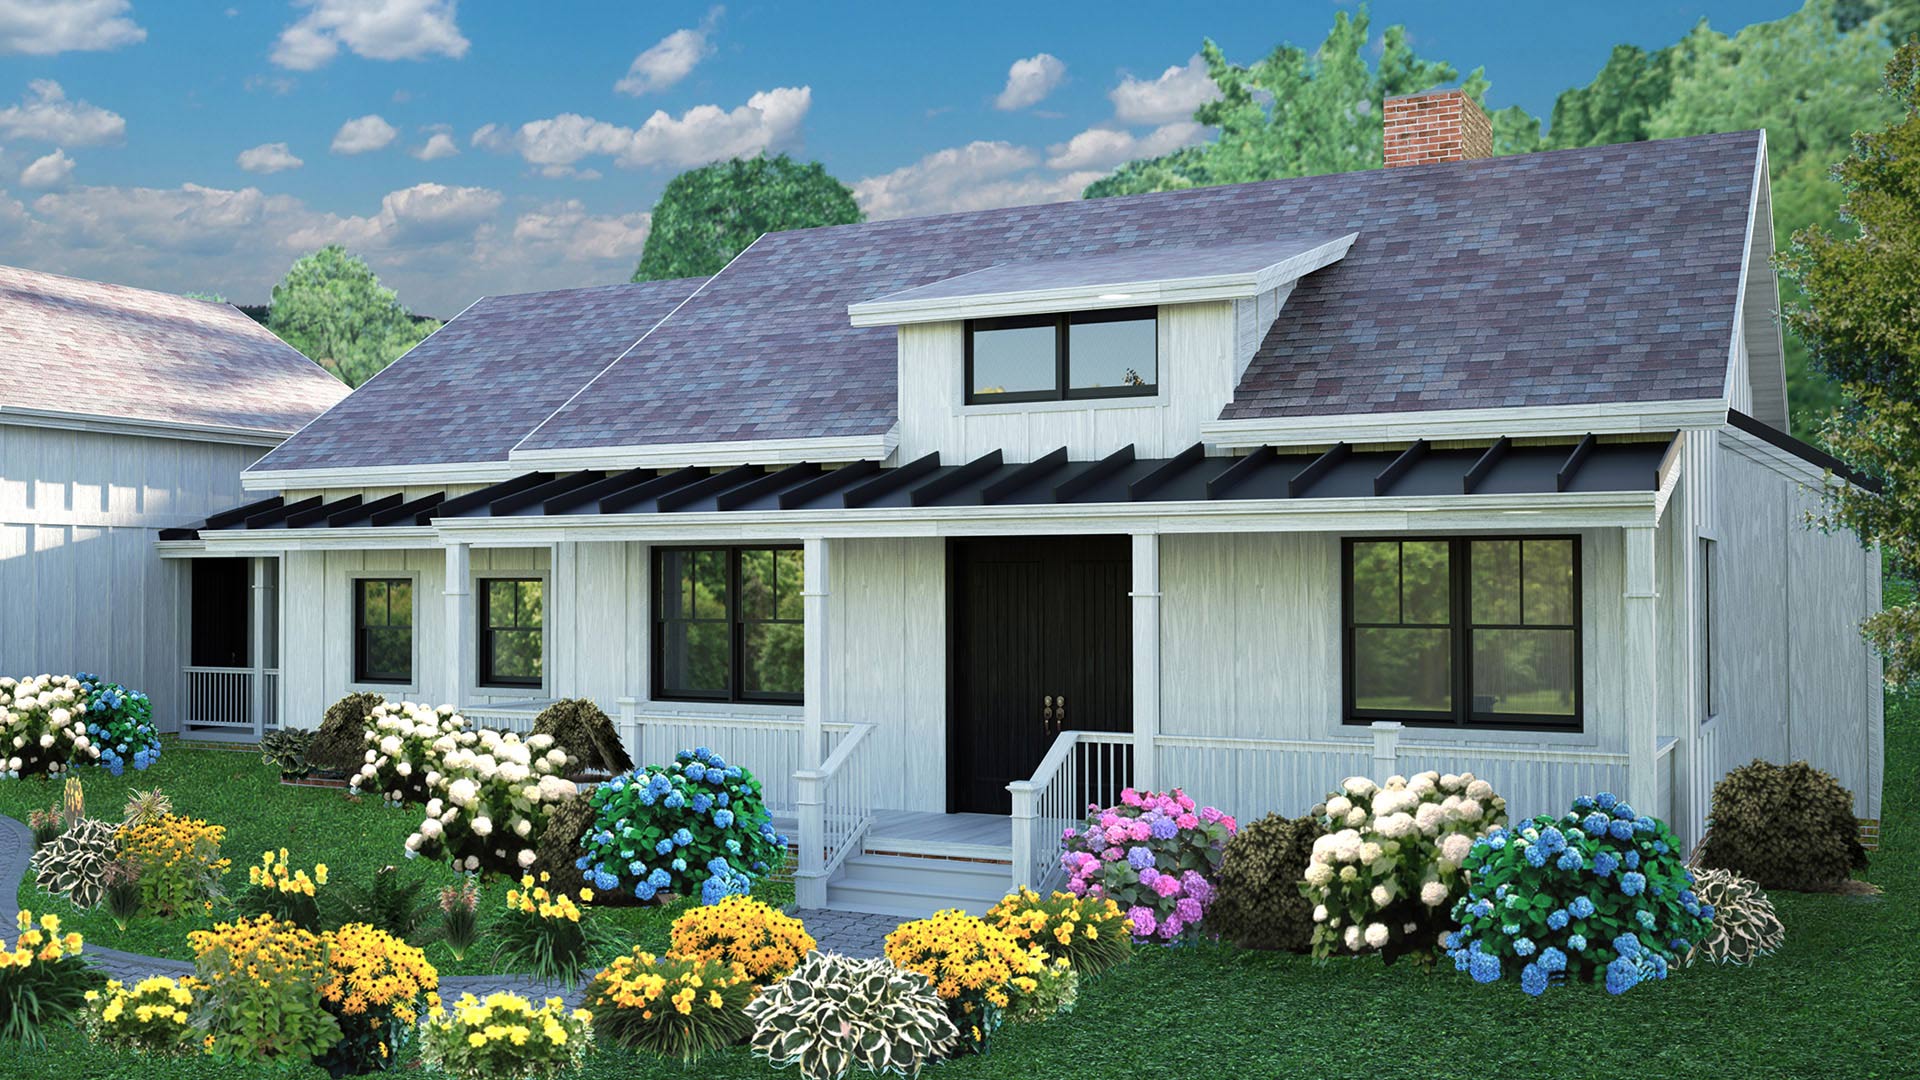 Exterior rendering of a Ranch house in Waterford, Connecticut.